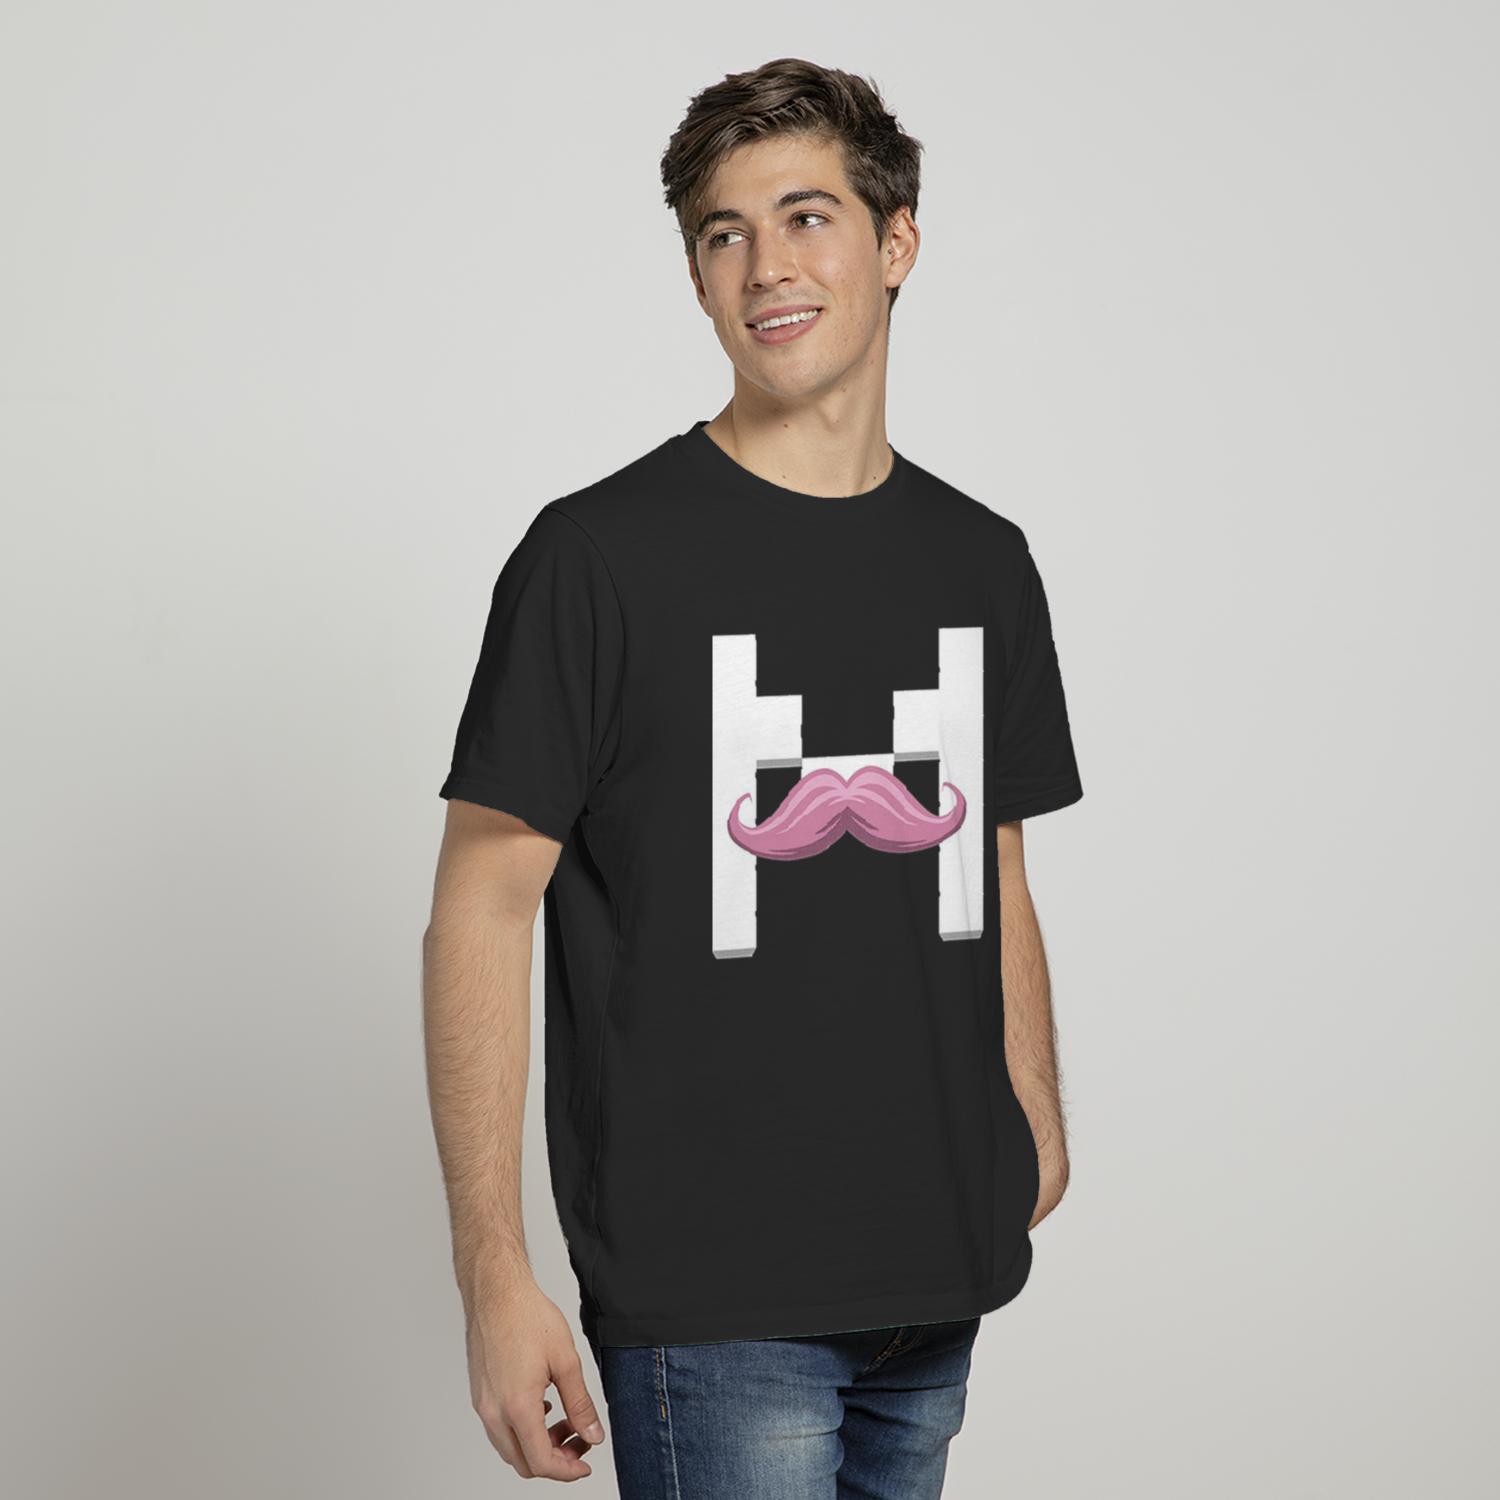 Markiplier Shop: Express Your Passion for Gaming with Markiplier Merch